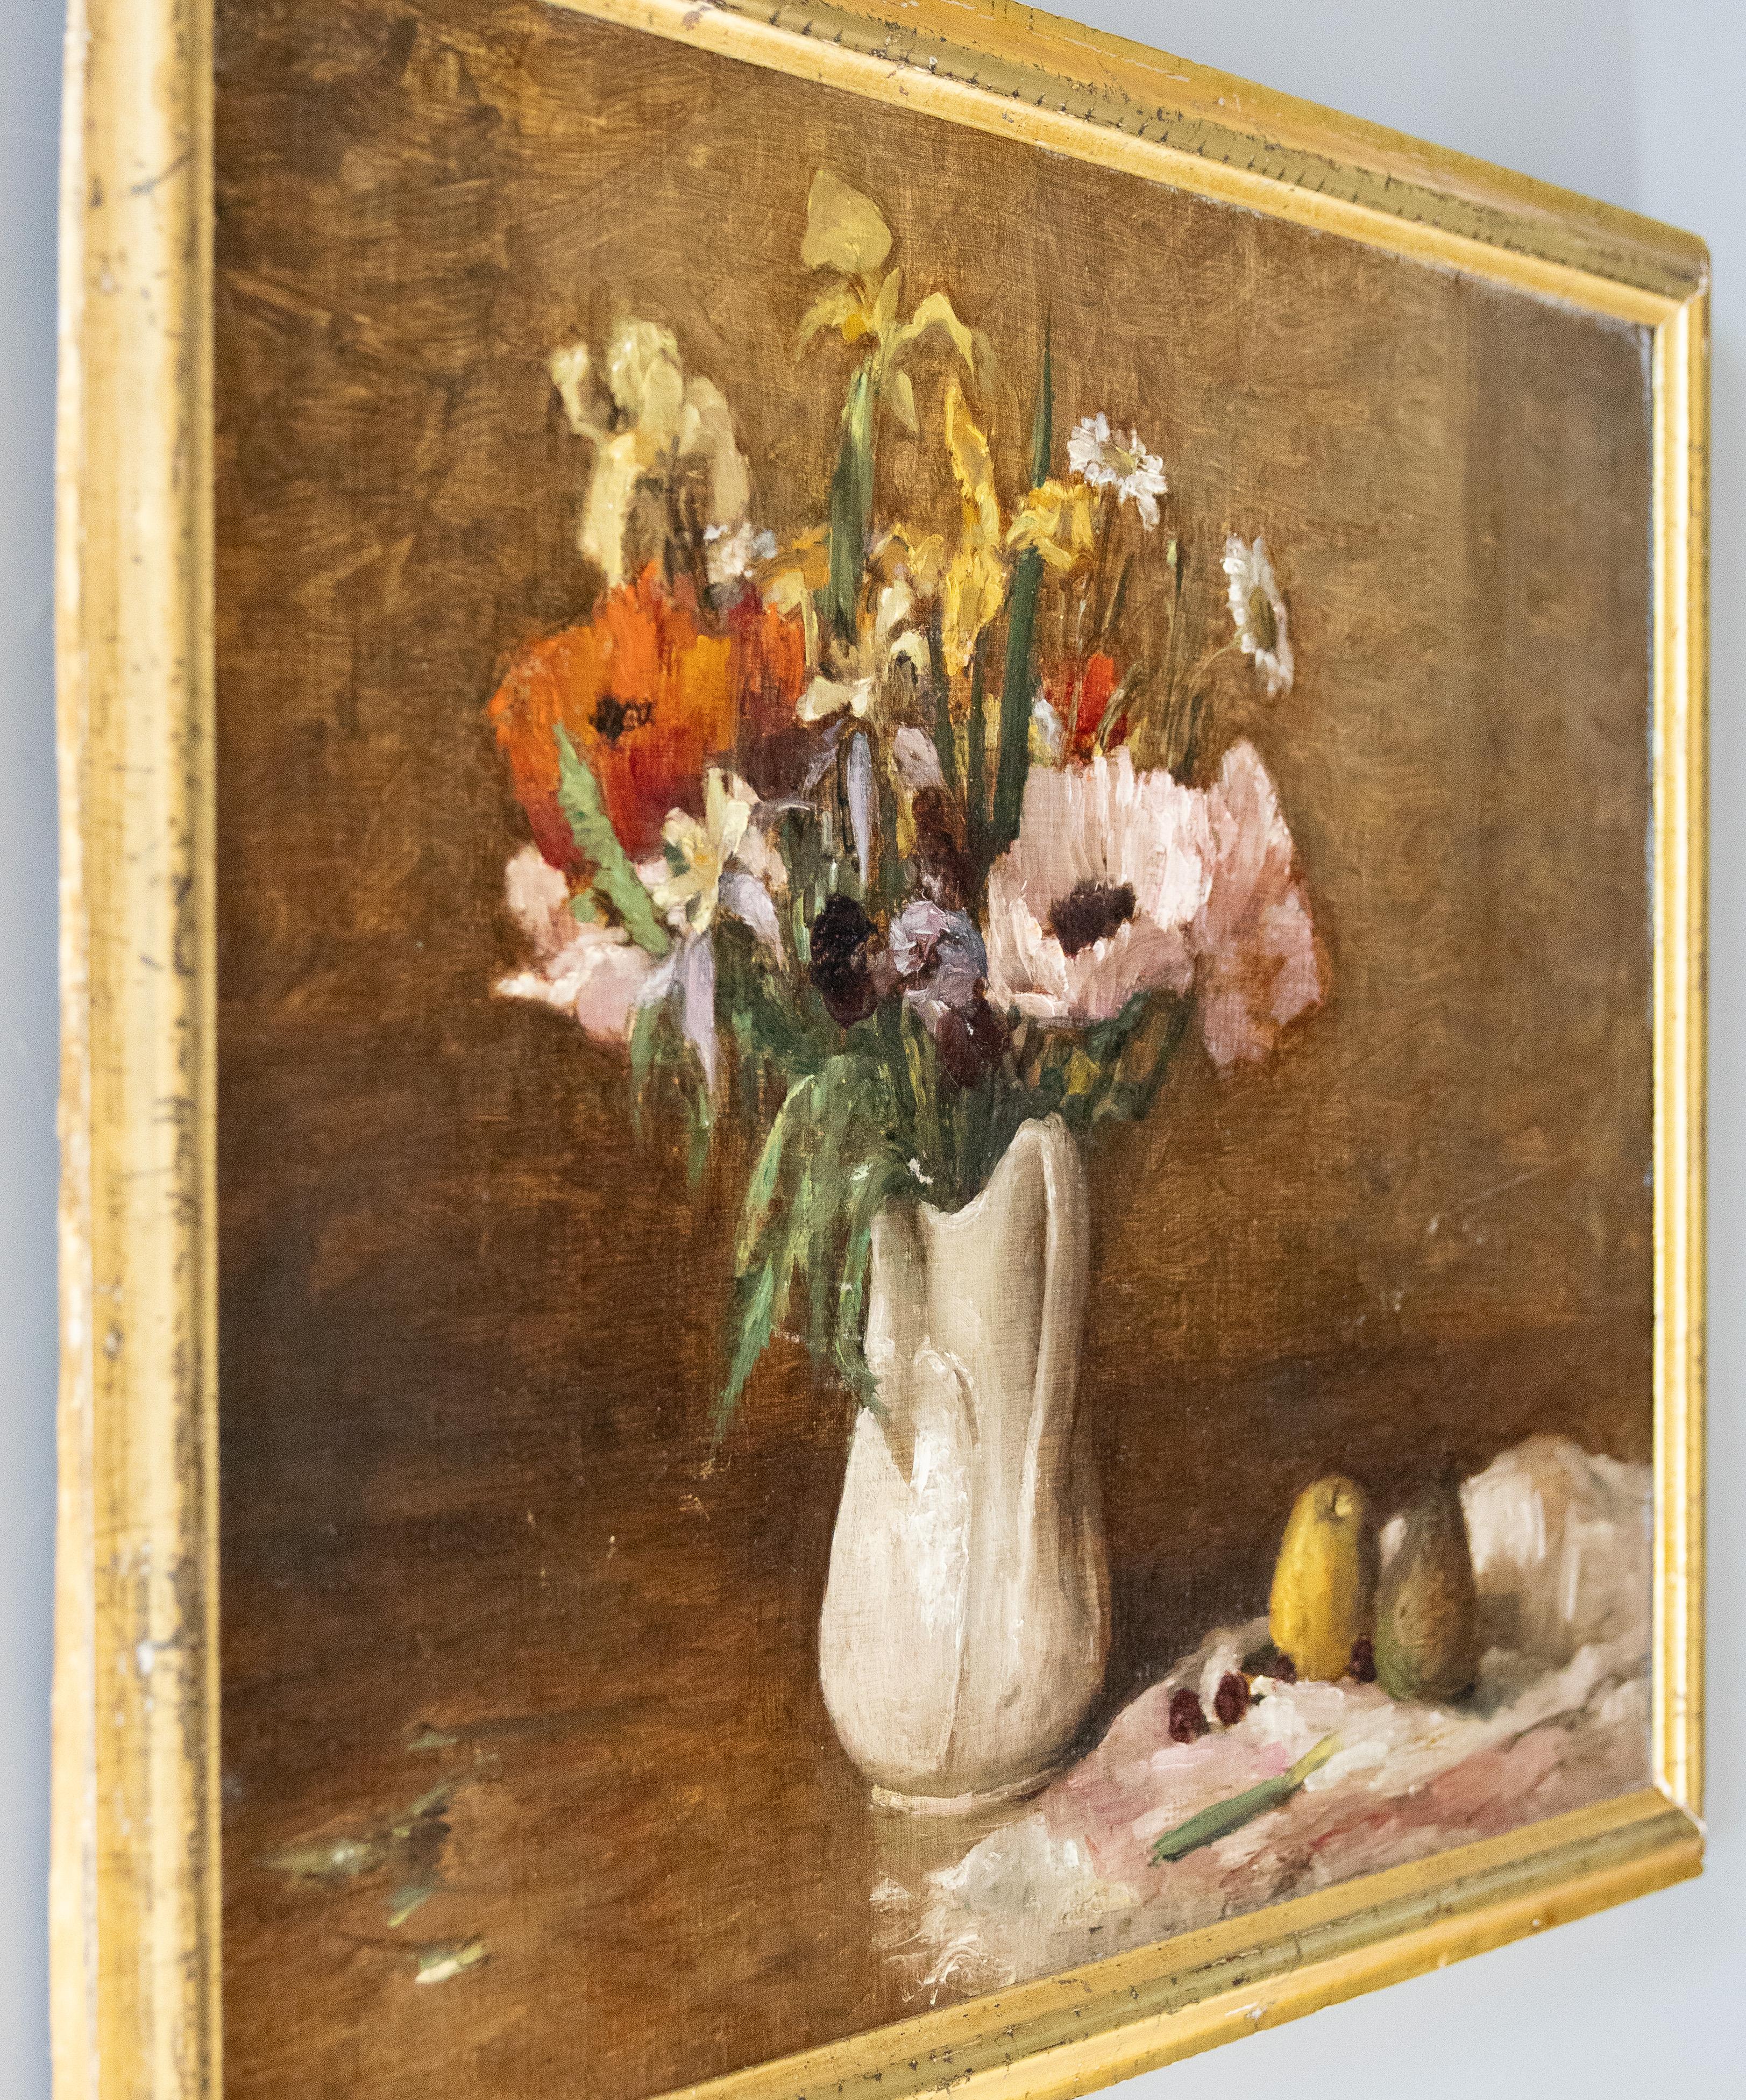 Ironstone Vase with Poppies, Pears - Still Life, Oil on Canvas For Sale 2